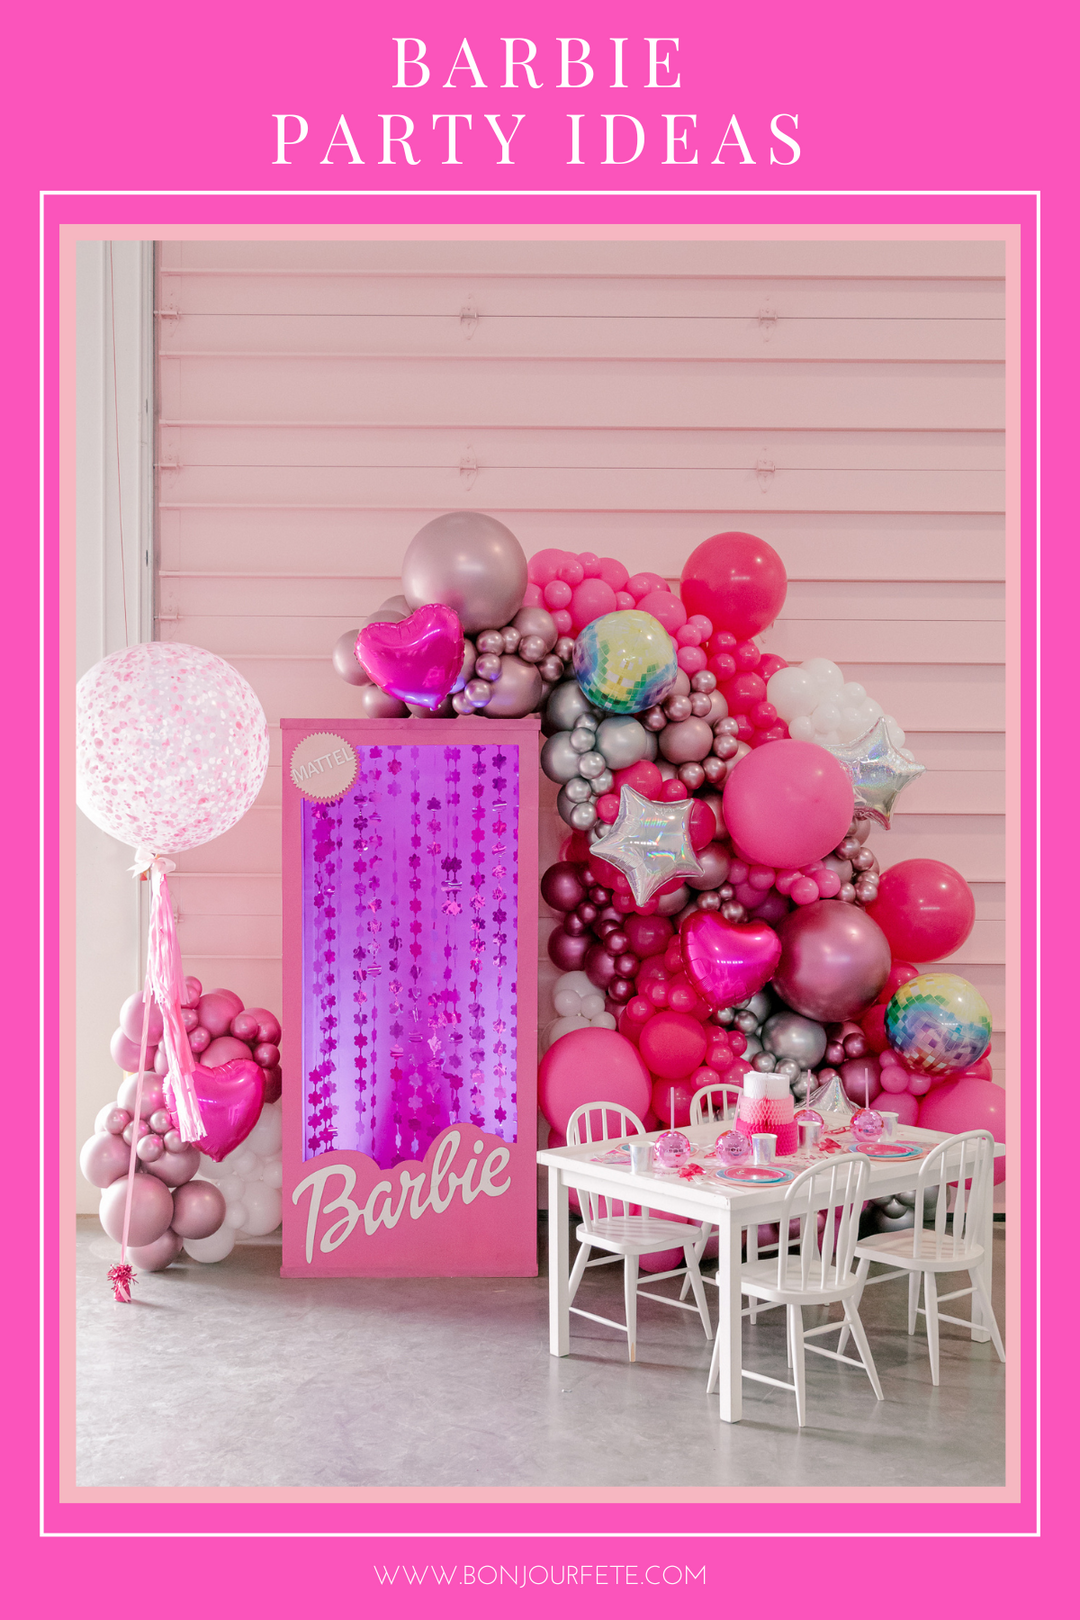 HOW TO THROW THE MOST FABULOUS BARBIE PARTY